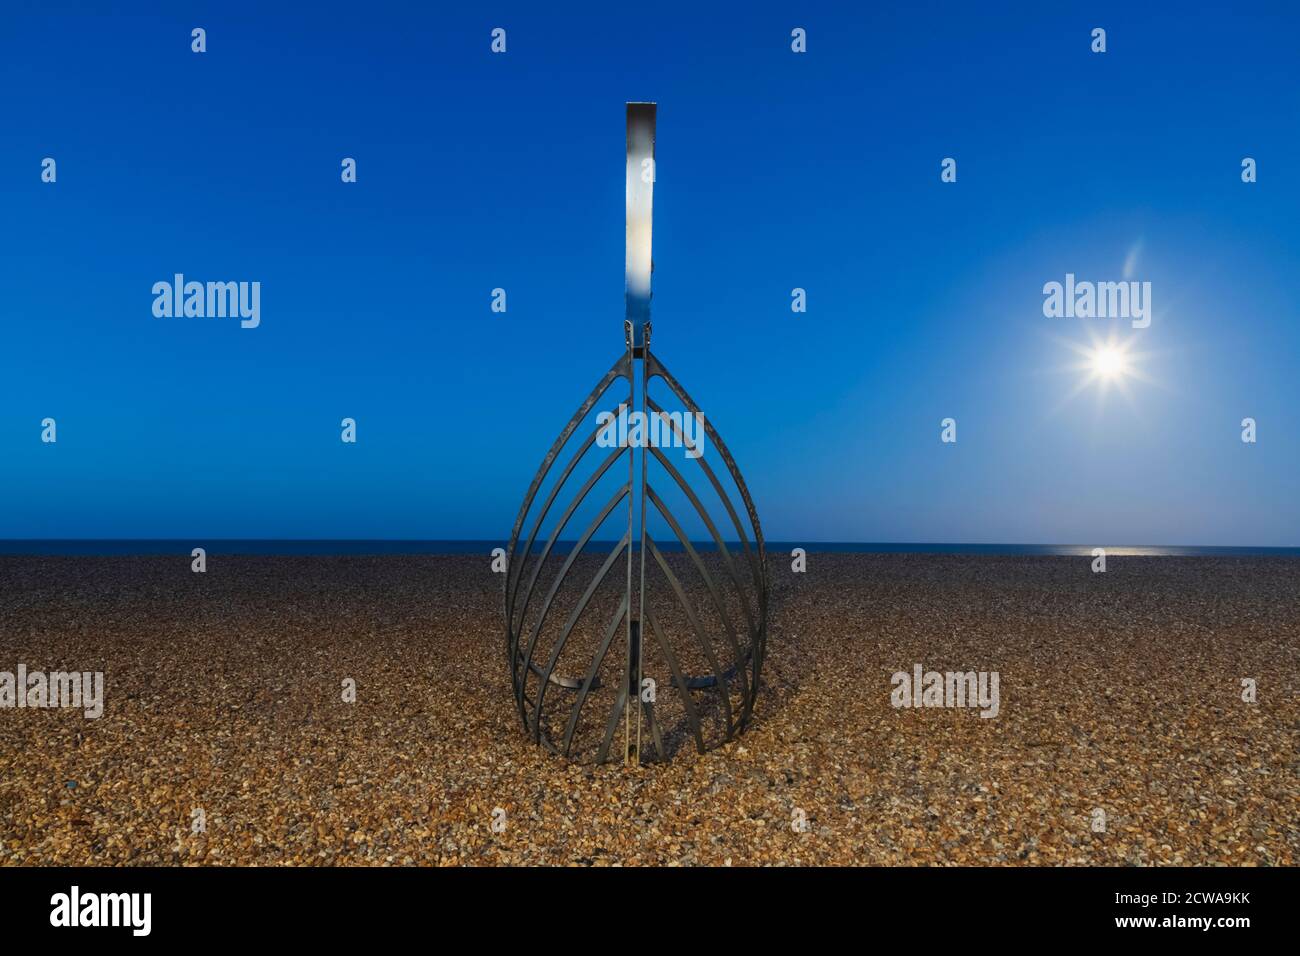 England, East Sussex, Hastings, Hastings Beach, The Norman Longboat Sculpture von Leigh Dyer Stockfoto